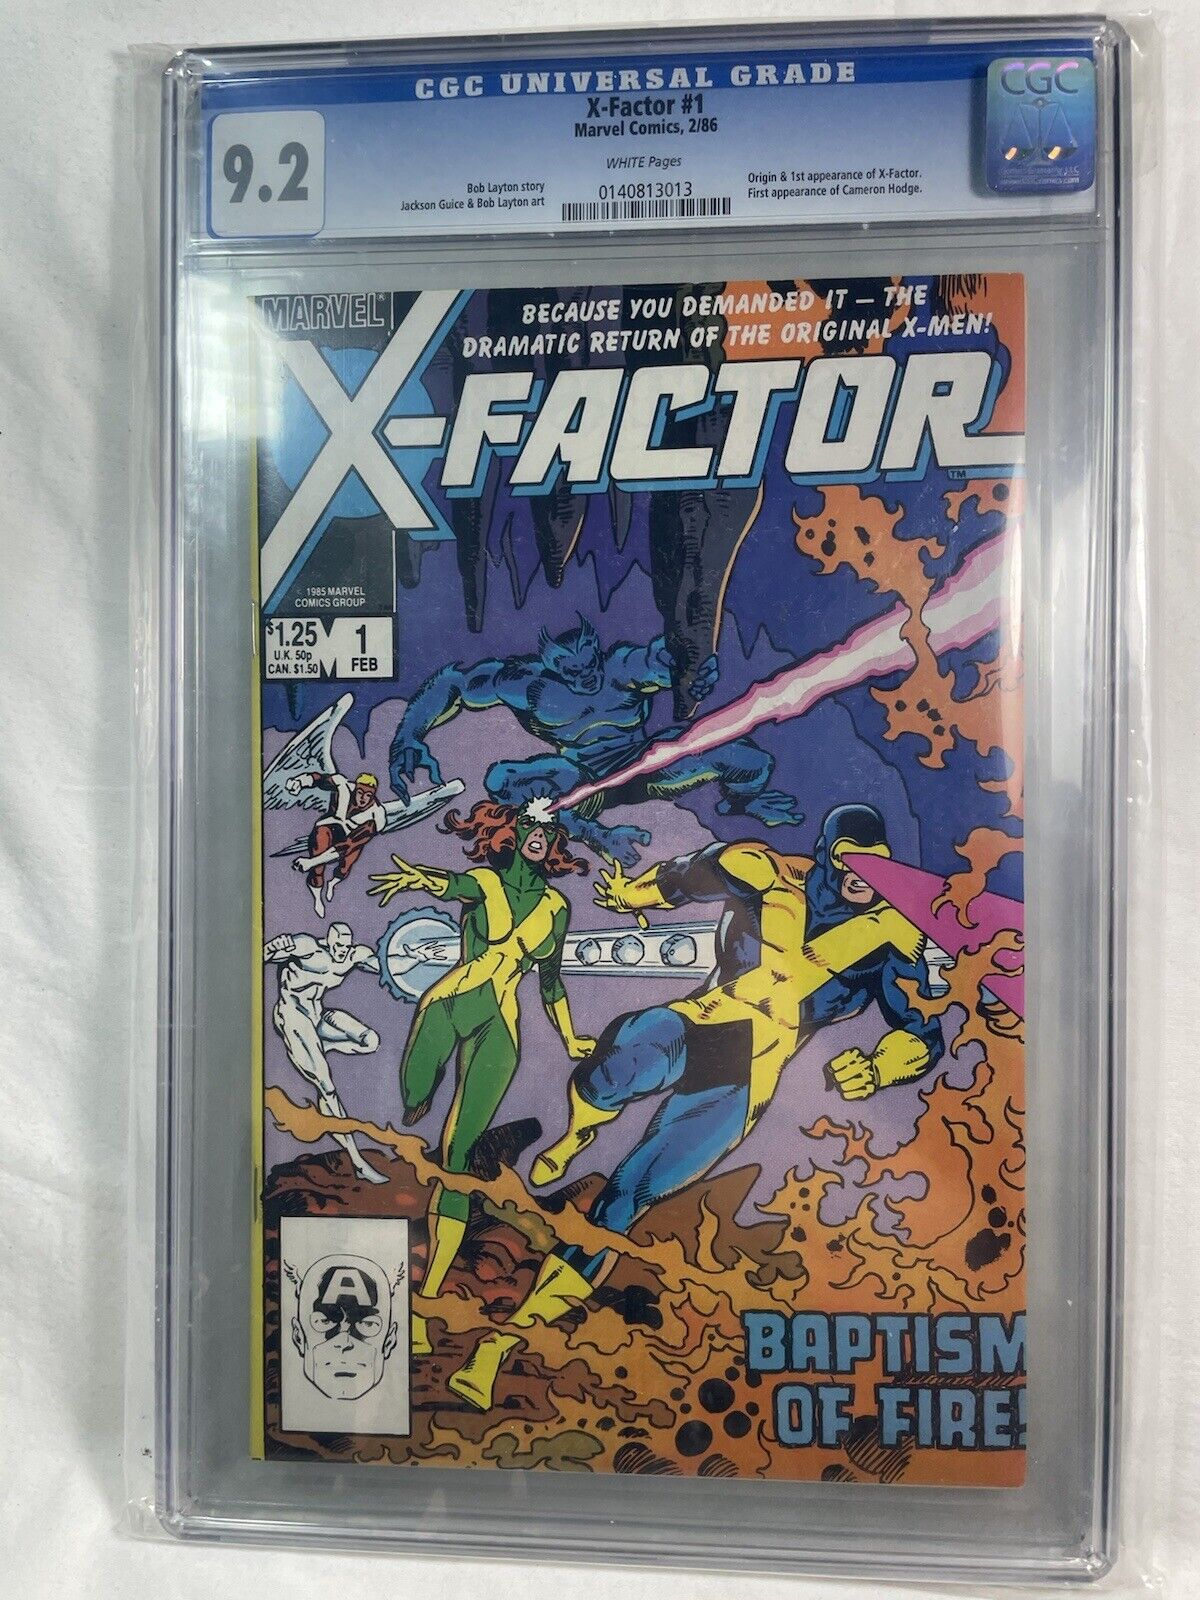 X-FACTOR #1 CGC 9.2 NM 1st Appearance of X-Factor & Cameron Hodge WHITE PAGES